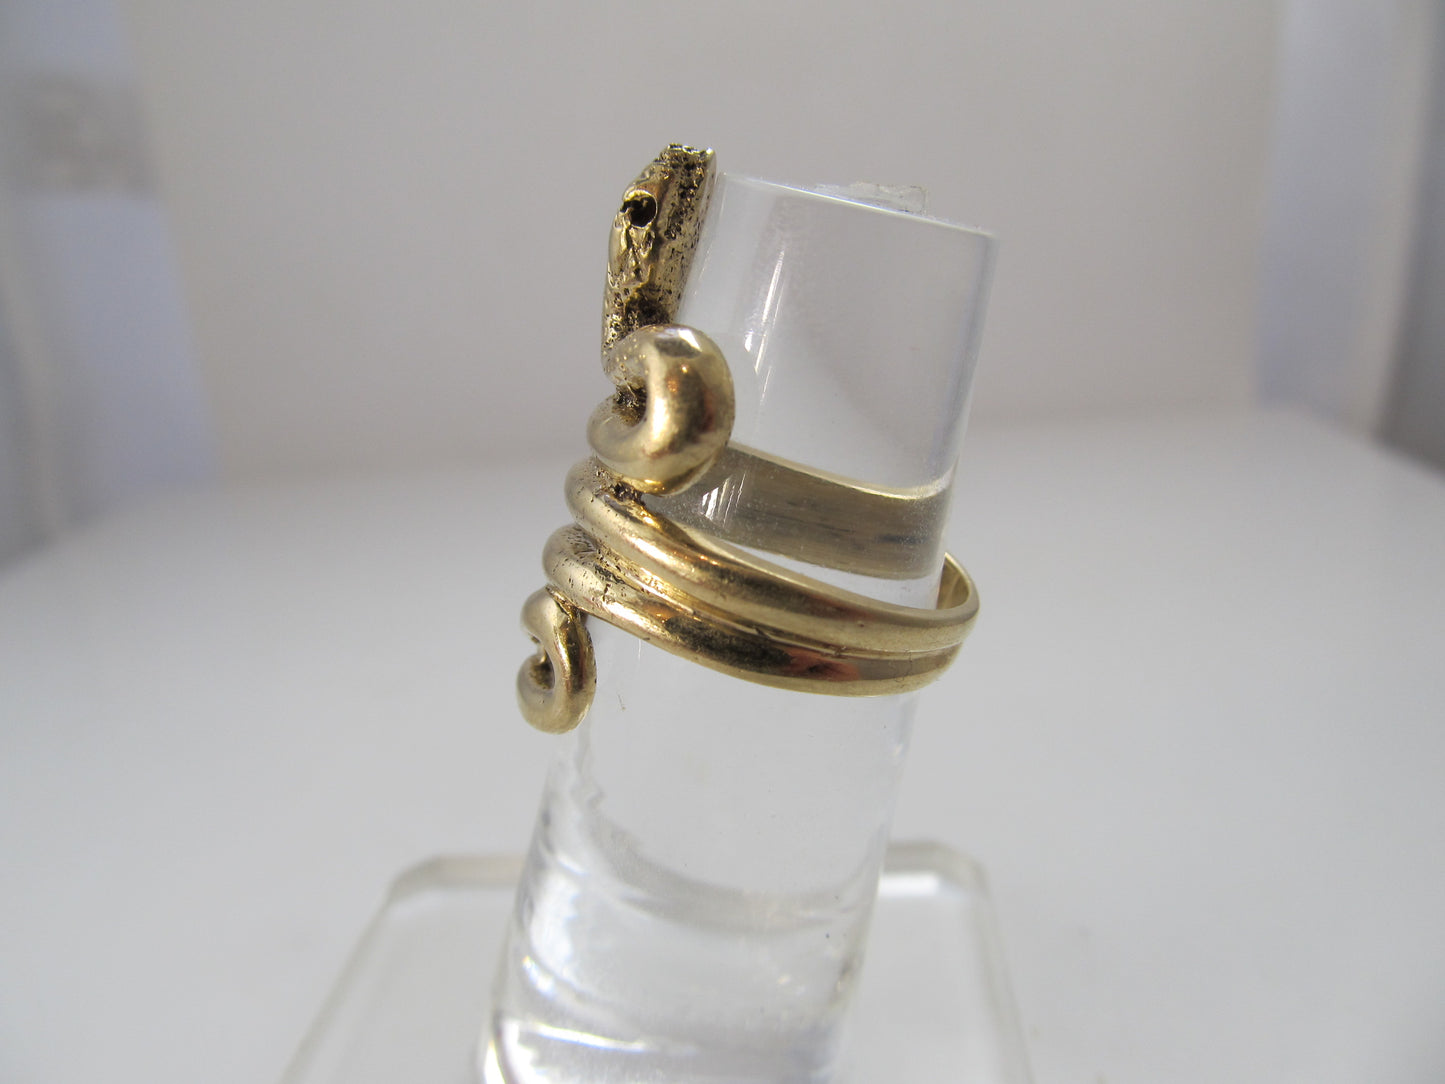 Vintage long coiled snake ring